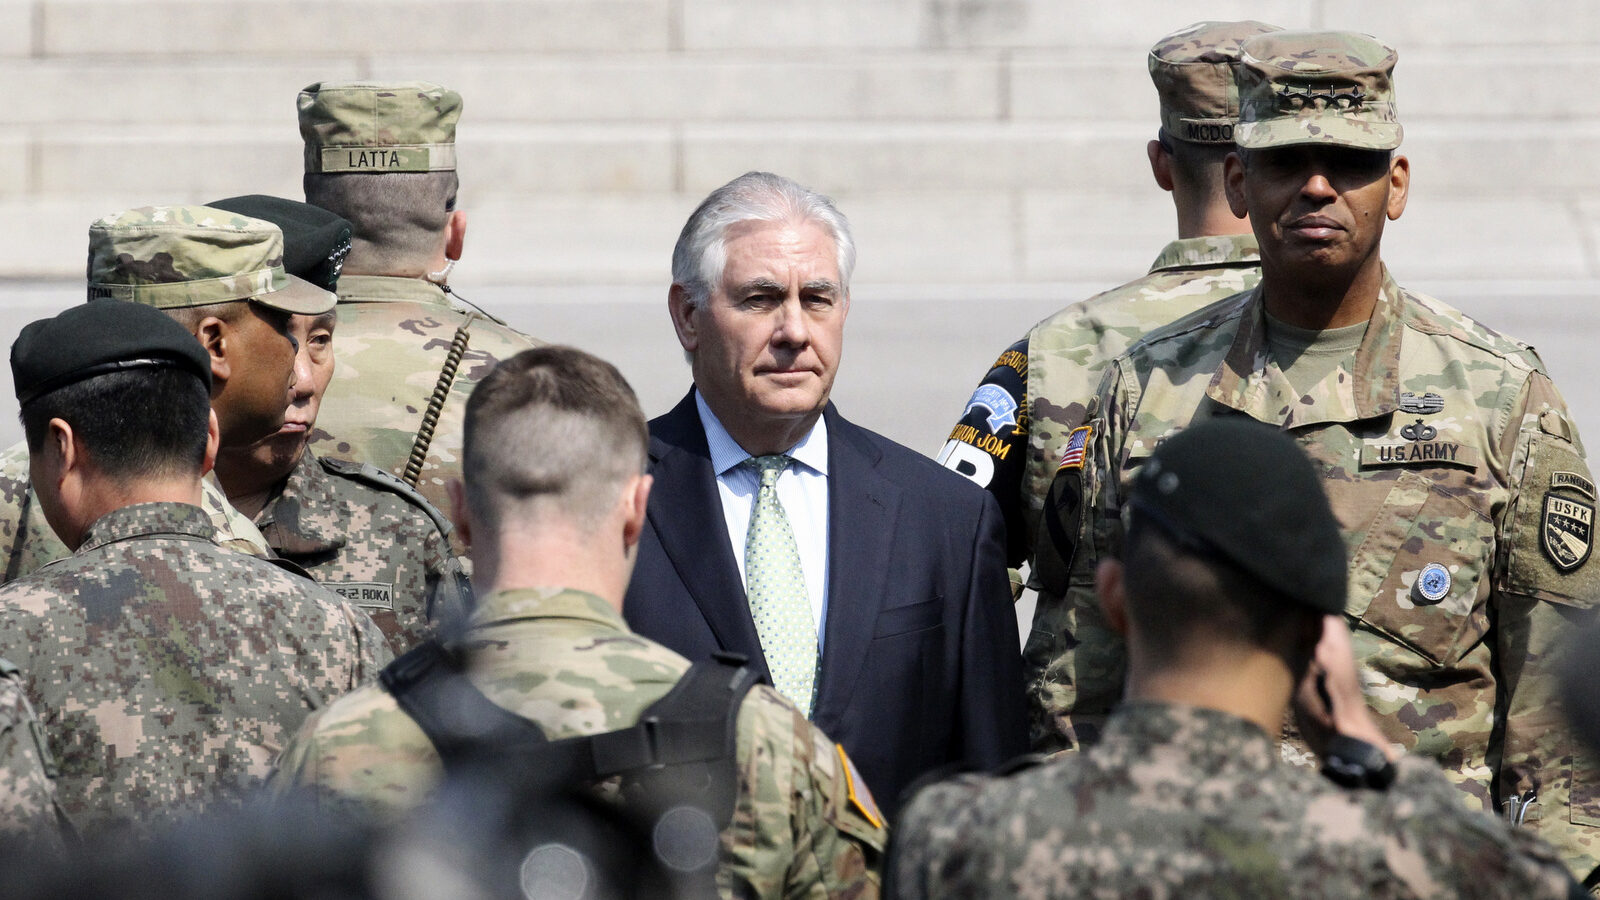 U.S. Secretary of State Rex Tillerson, center, visits with U.S. Gen. Vincent K. Brooks, commander of the United Nations Command, Combined Forces Command and United States Forces Korea, right, at the border village of Panmunjom, which has separated the two Koreas since the Korean War, South Korea, Friday, March 17, 2017. (AP/Lee Jin-man)